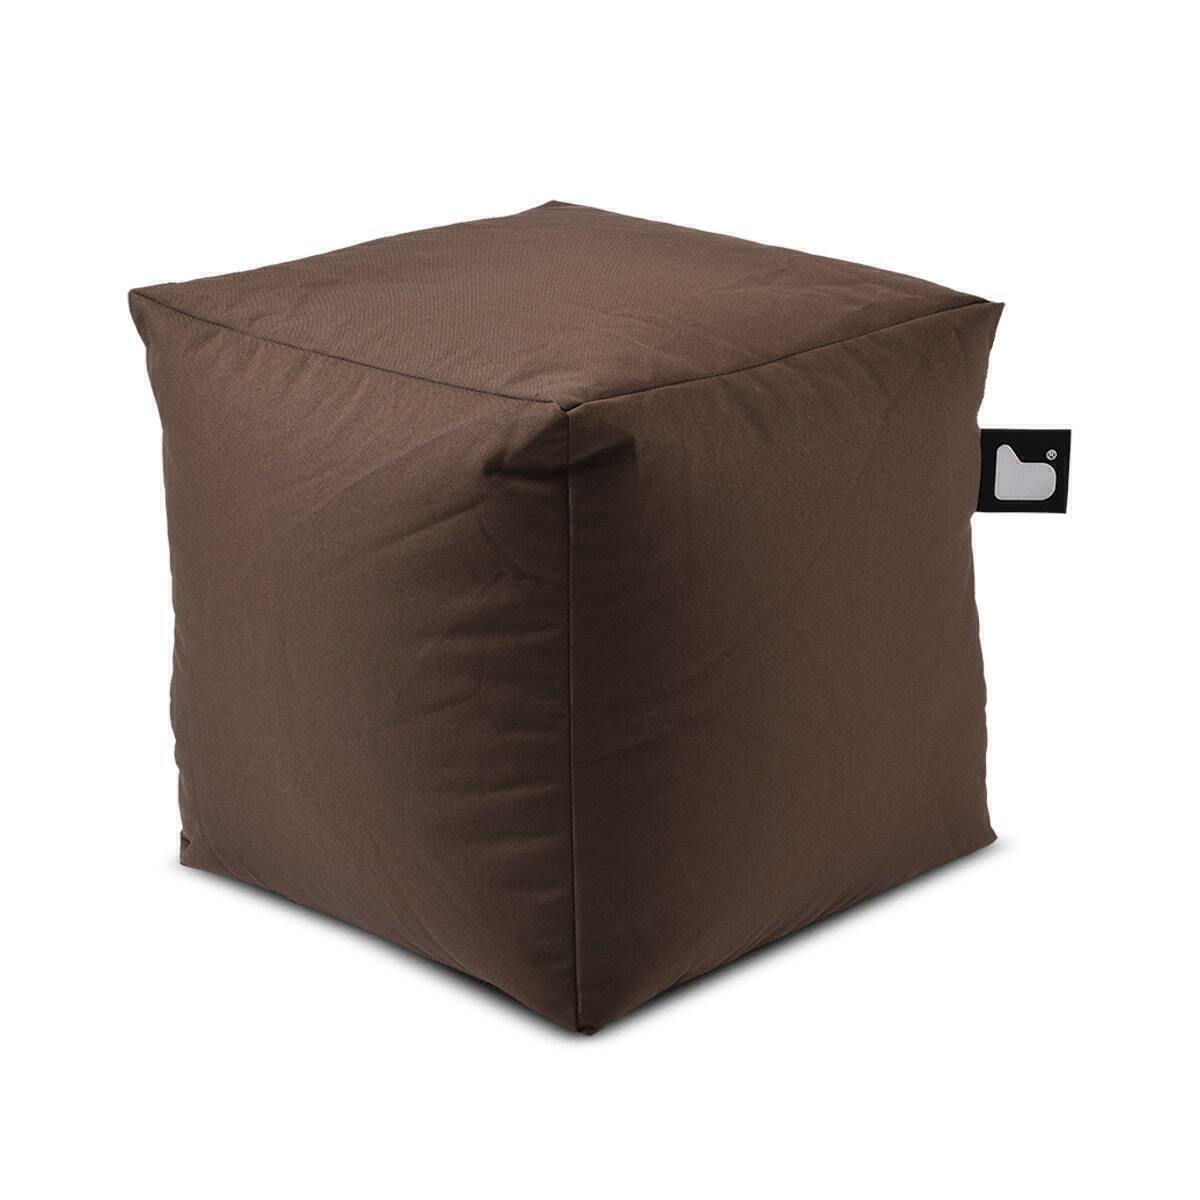 Extreme Lounging - Outdoor Bean Box  - Brown product image